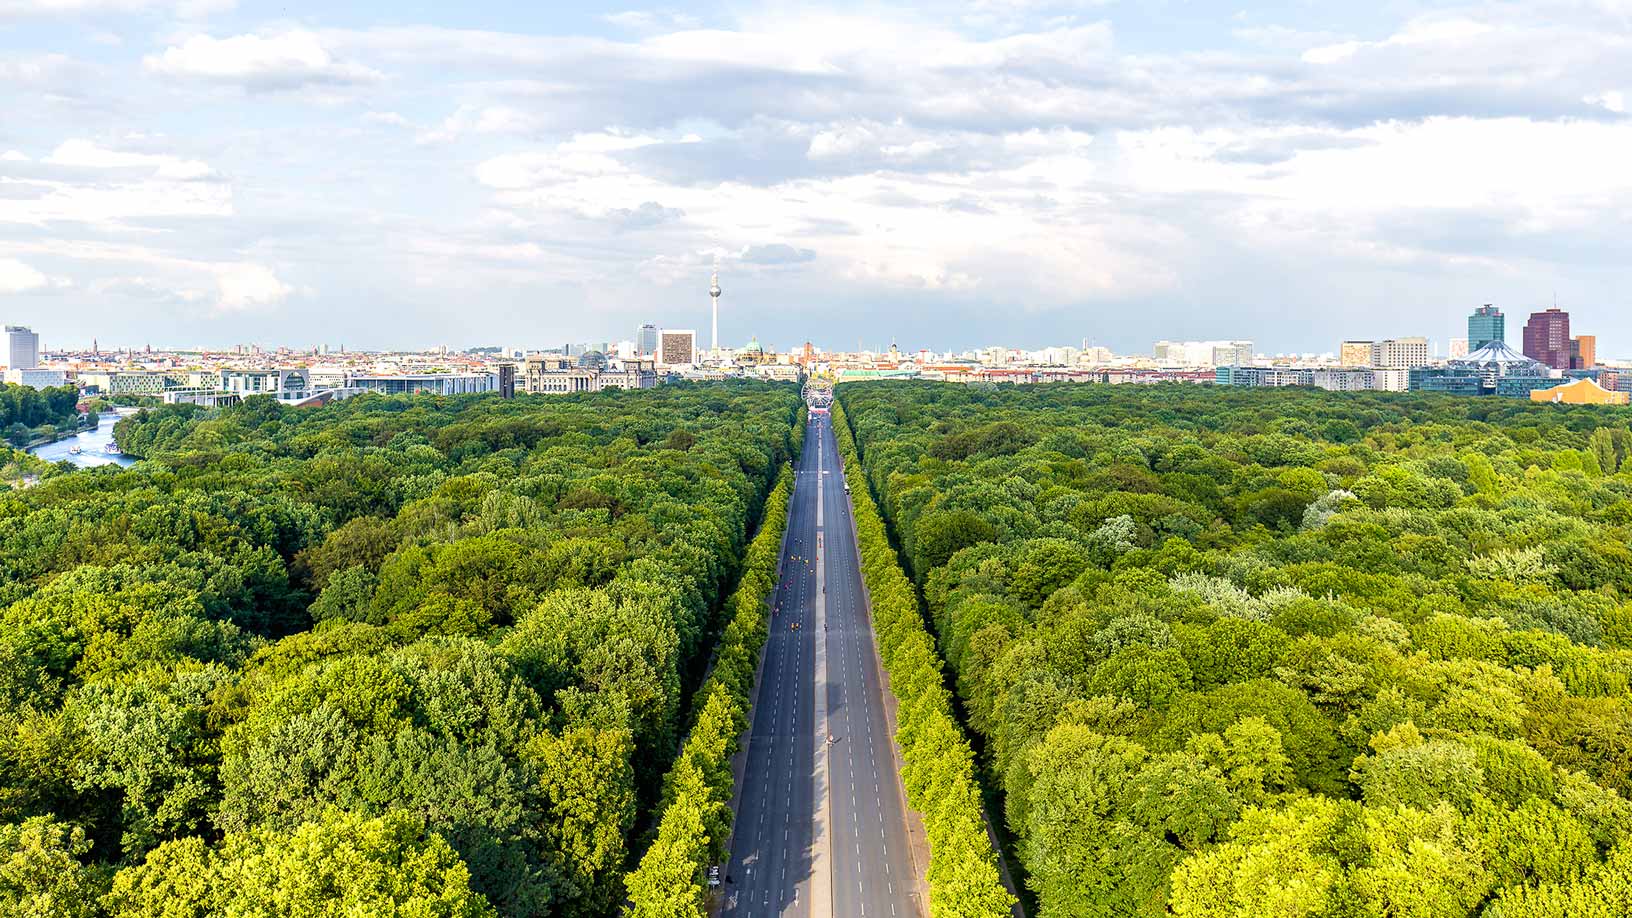 A long road with greenery on both sides